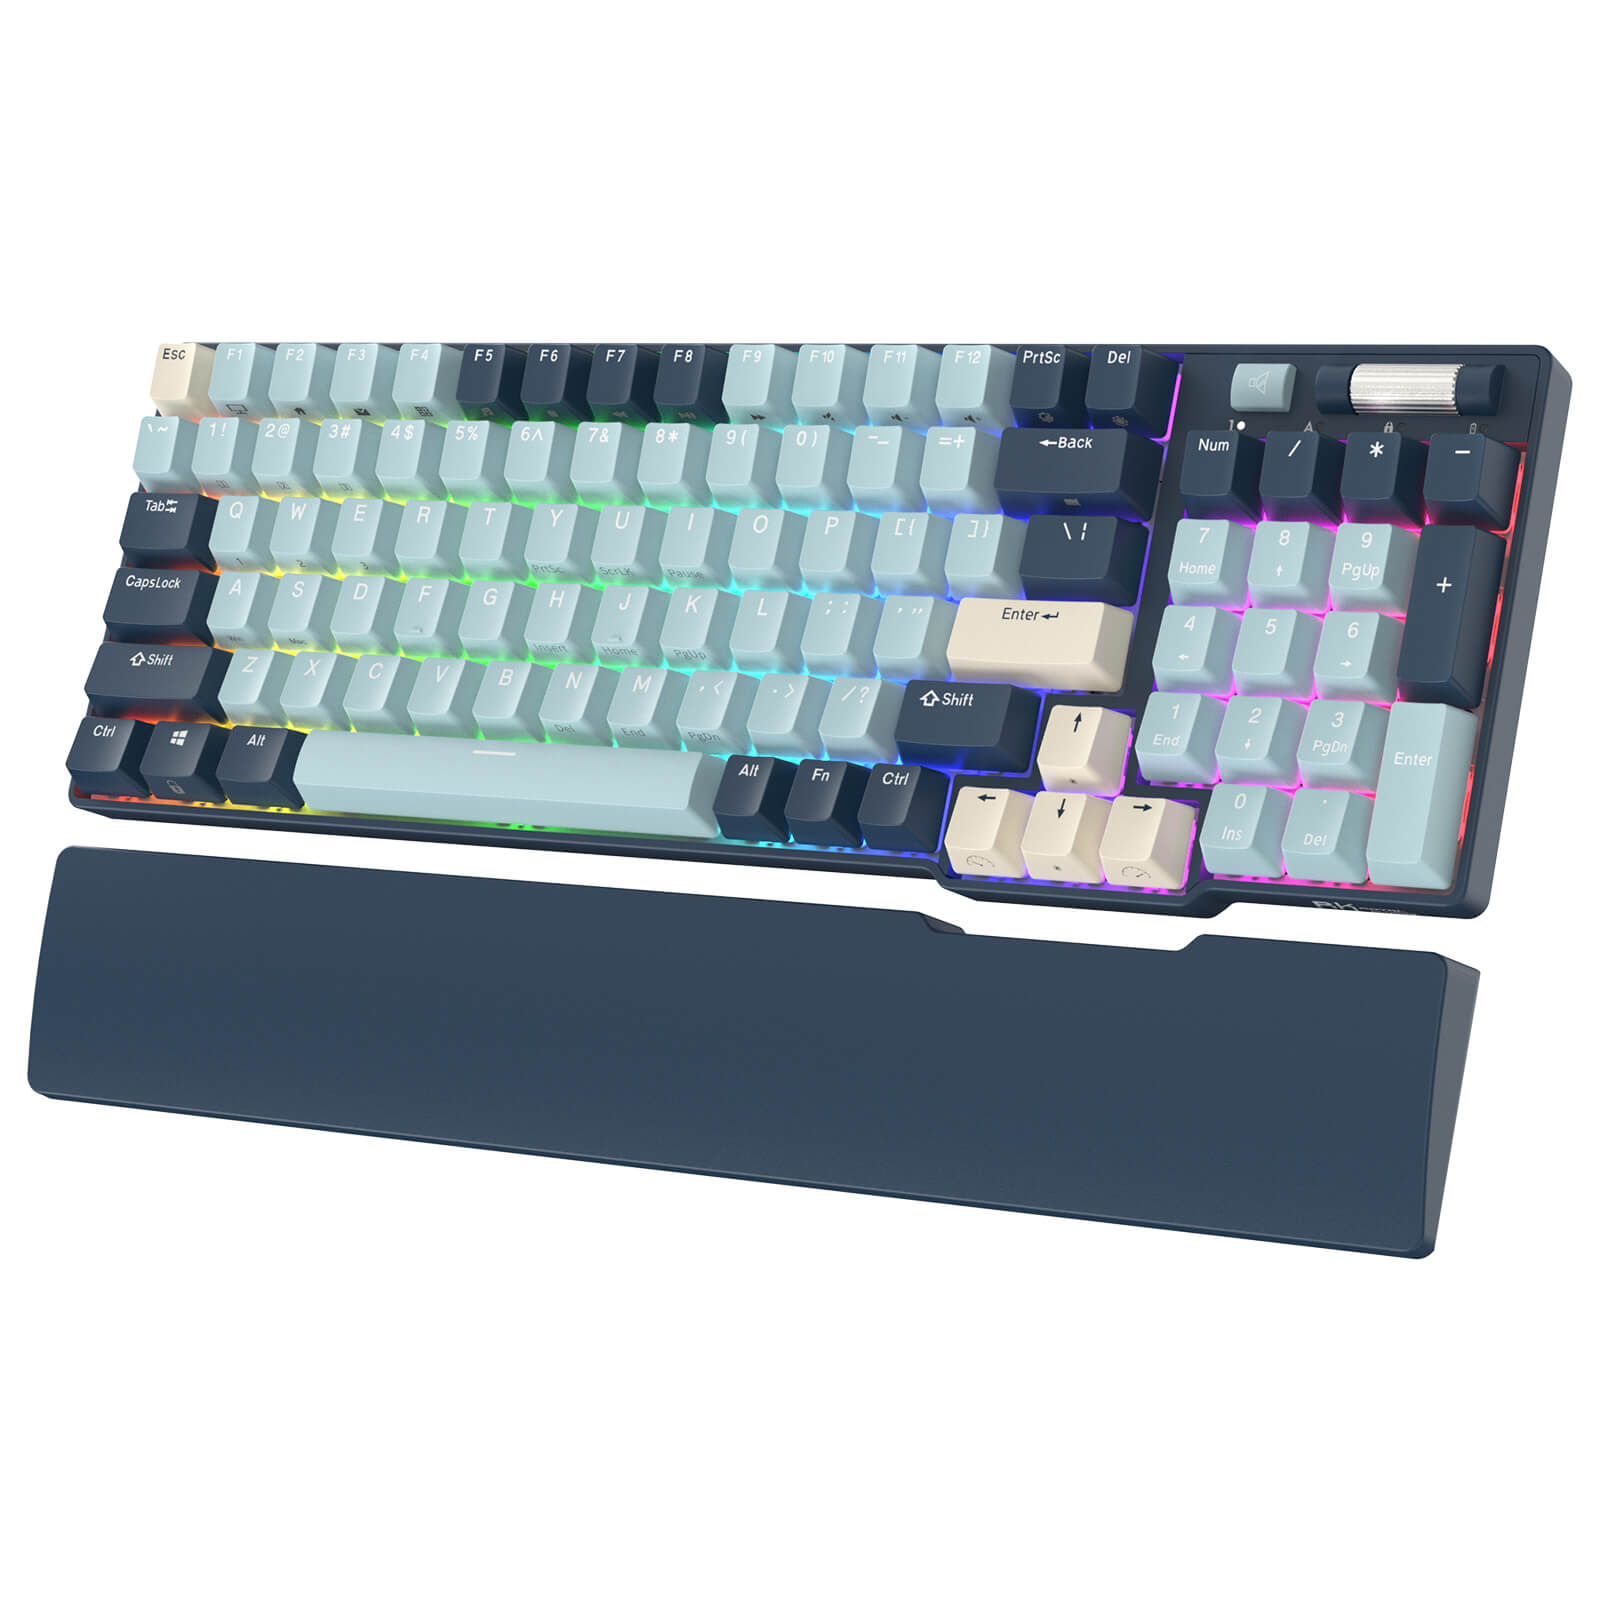 RK ROYAL KLUDGE RK96 RGB Limited Ed, 90% 96 Keys Wireless Triple Mode Bluetooth 5.0/2.4G/USB-C Hot Swappable Mechanical Keyboard,Forest Blue 